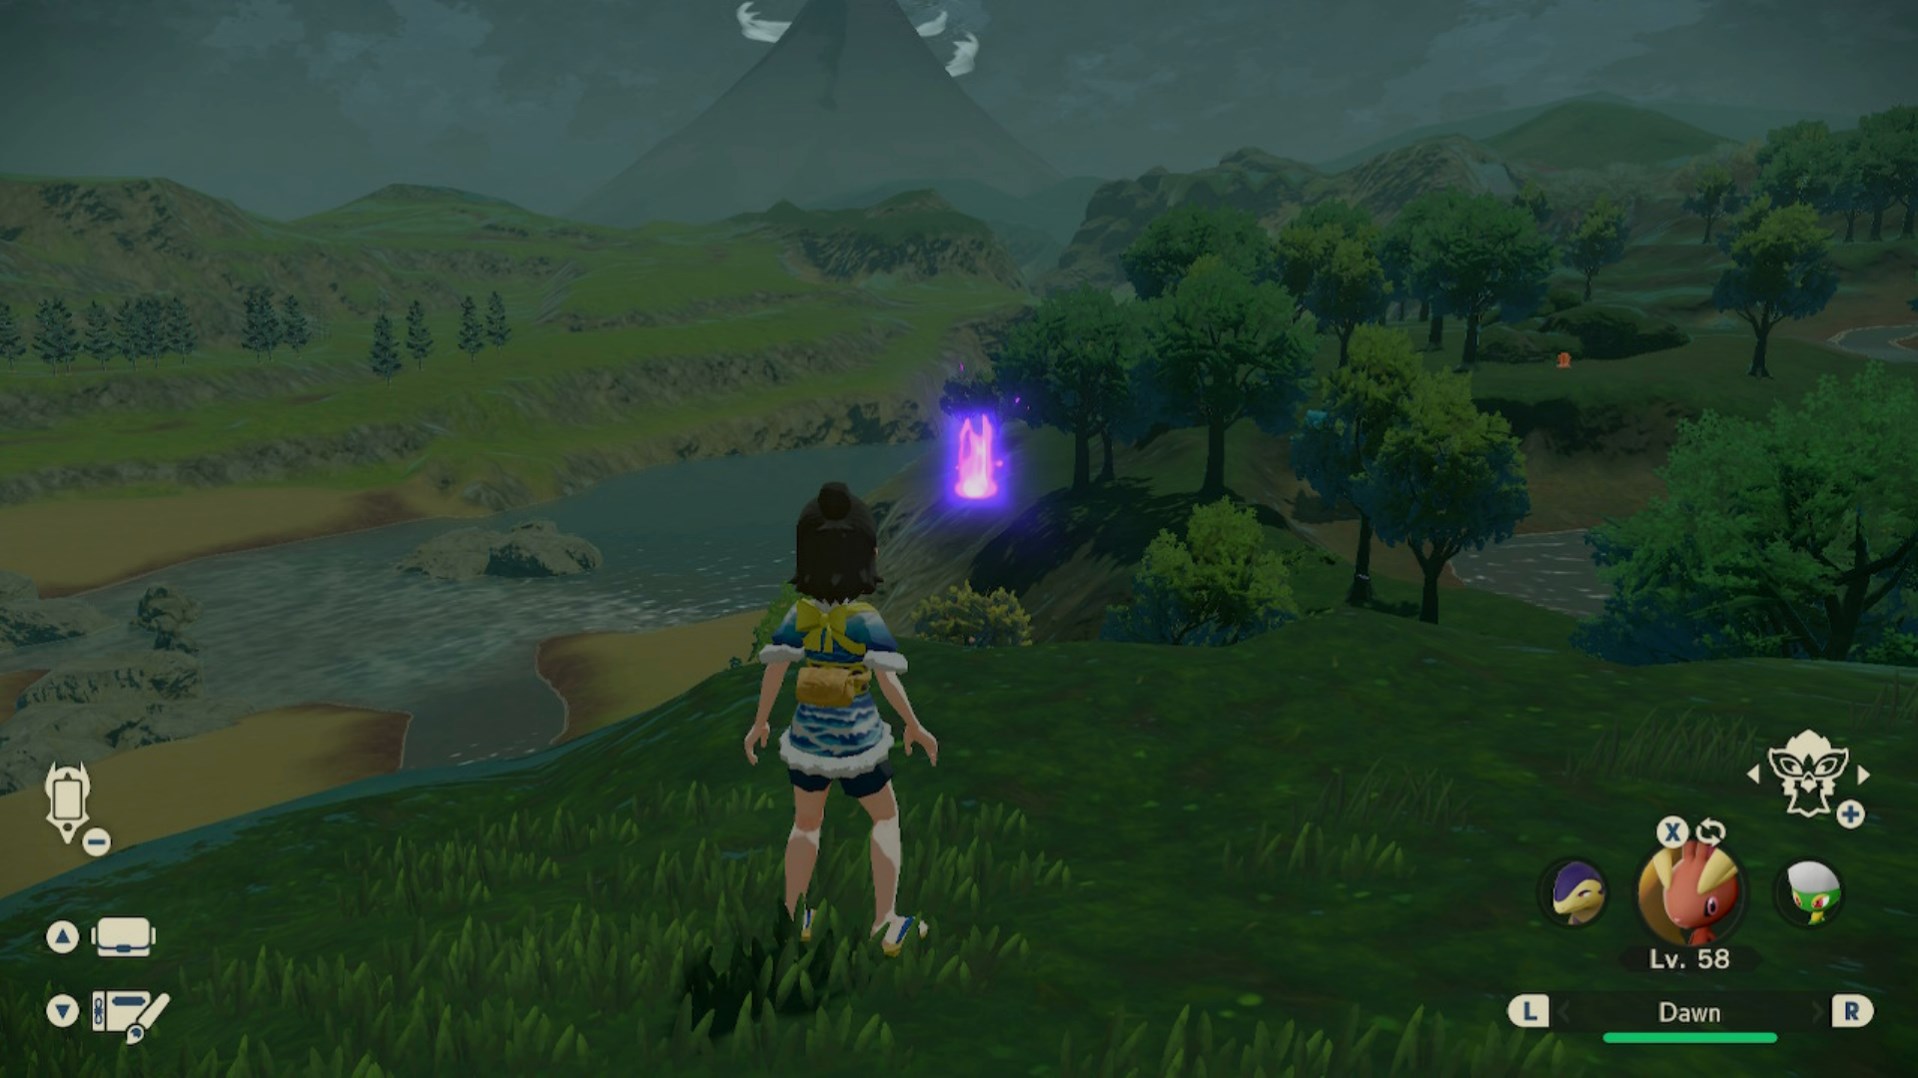 A Pokémon trainer stands in front of a purple glowing flame at night